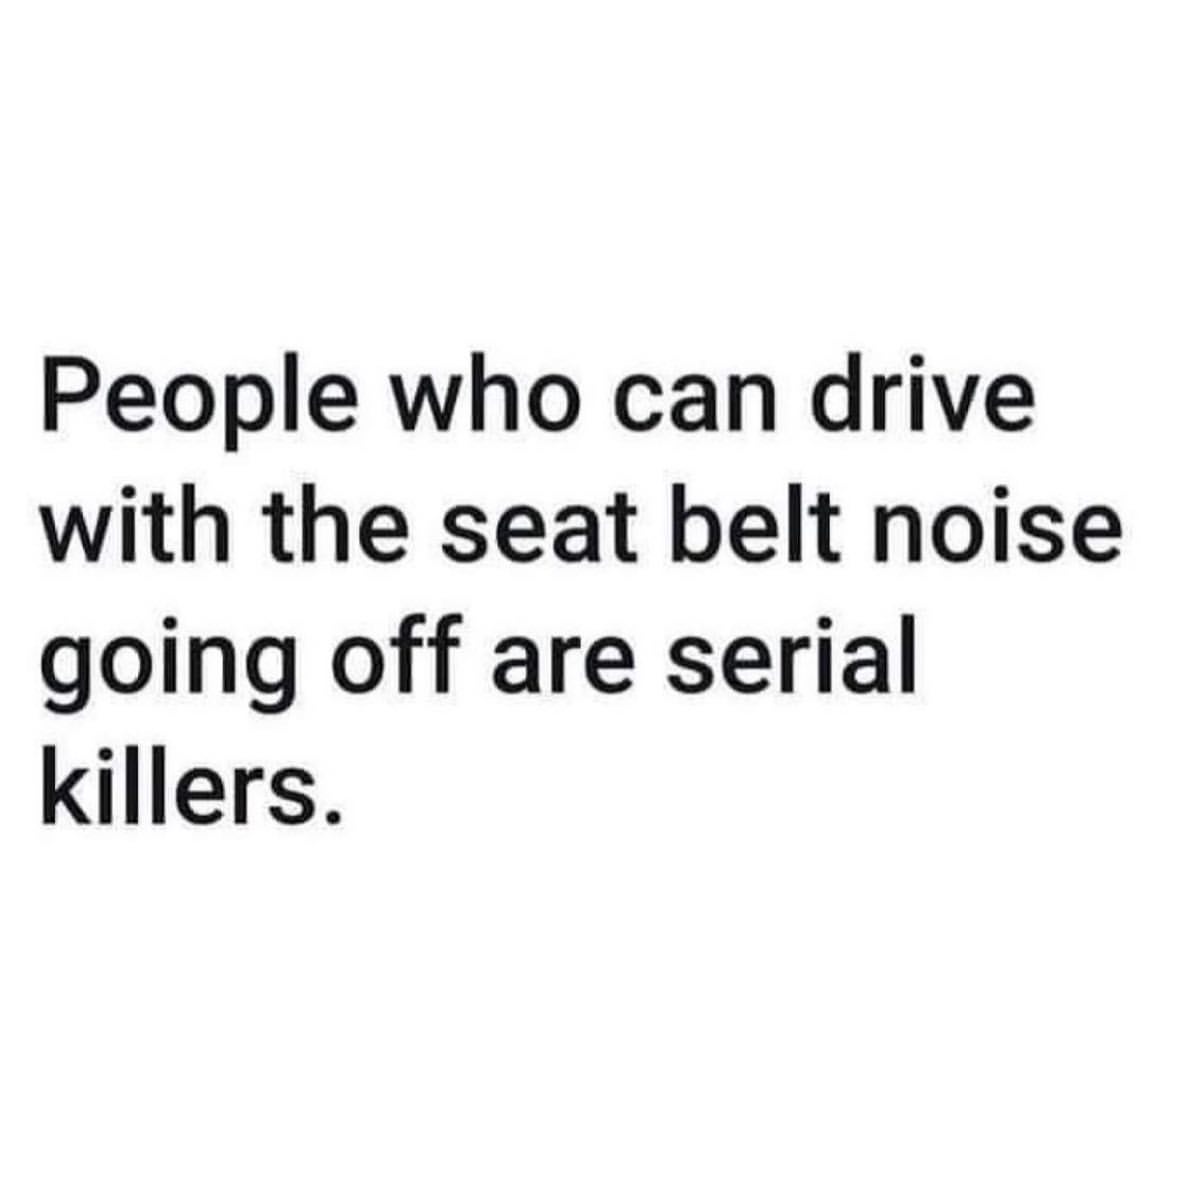 People who can drive with the seat belt noise going off are serial killers.